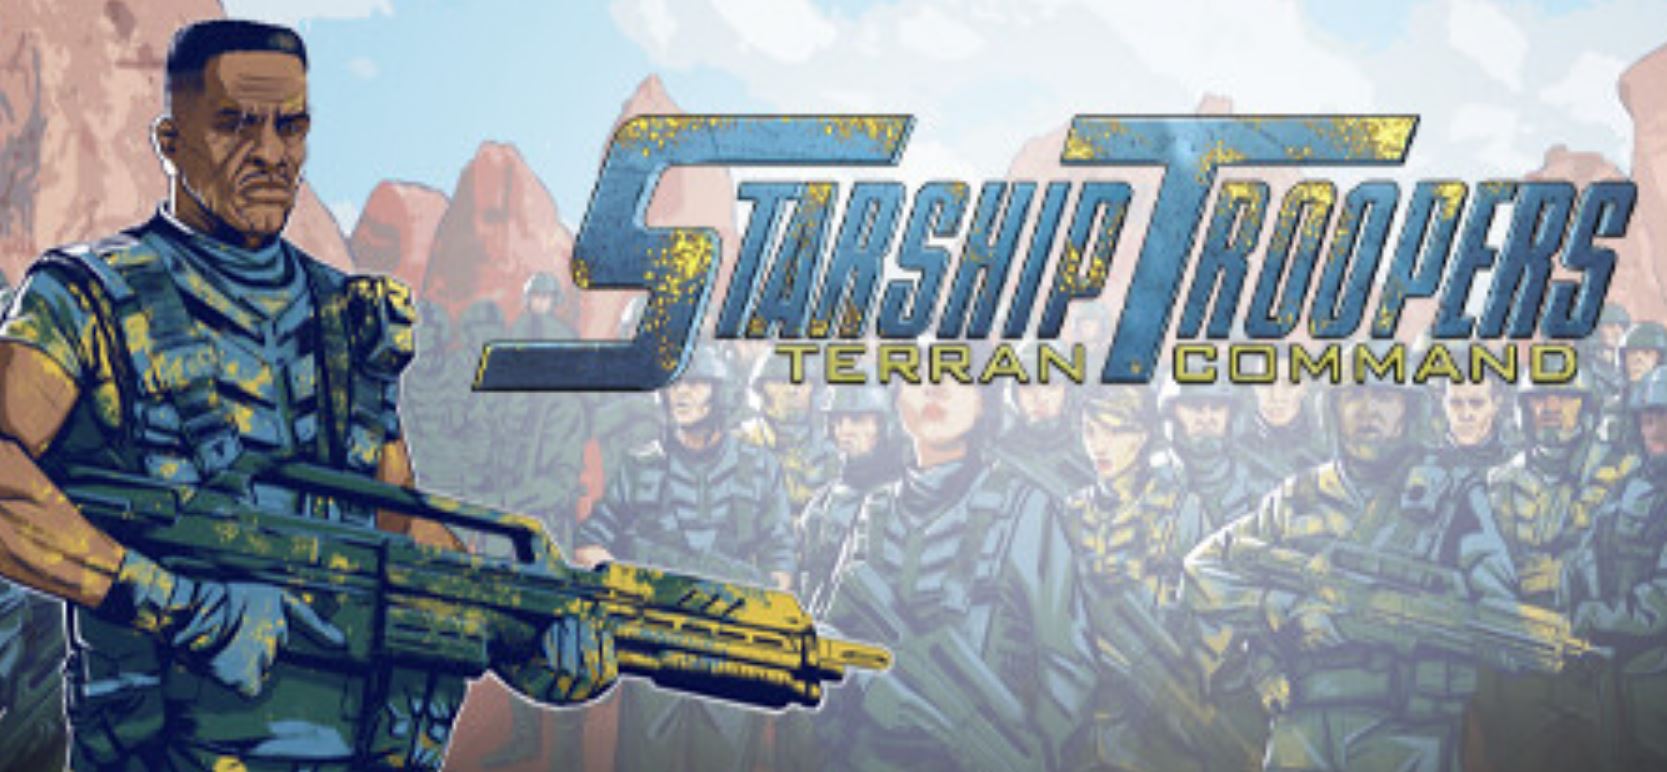 Download Starship Troopers Games